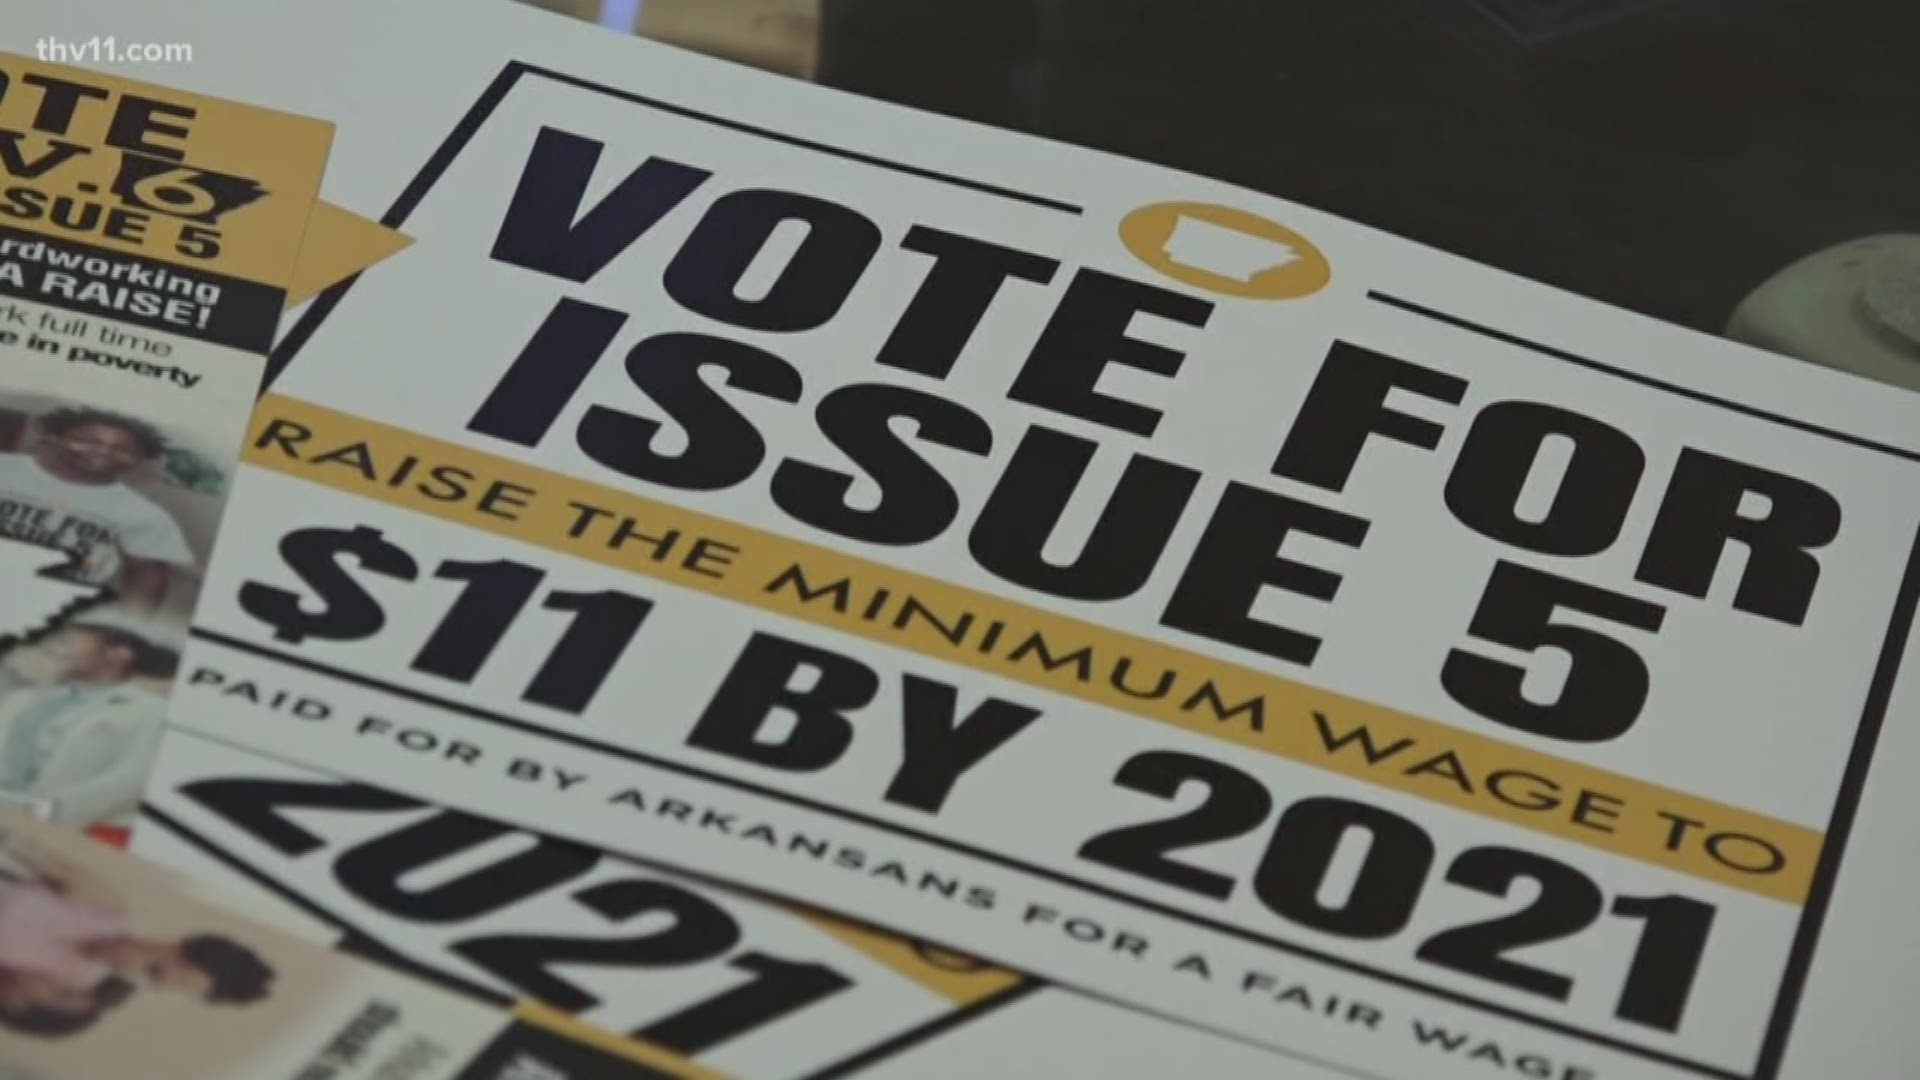 The fight over Arkansas's minimum wage continues tonight despite voters' overwhelming support to raise it in November.